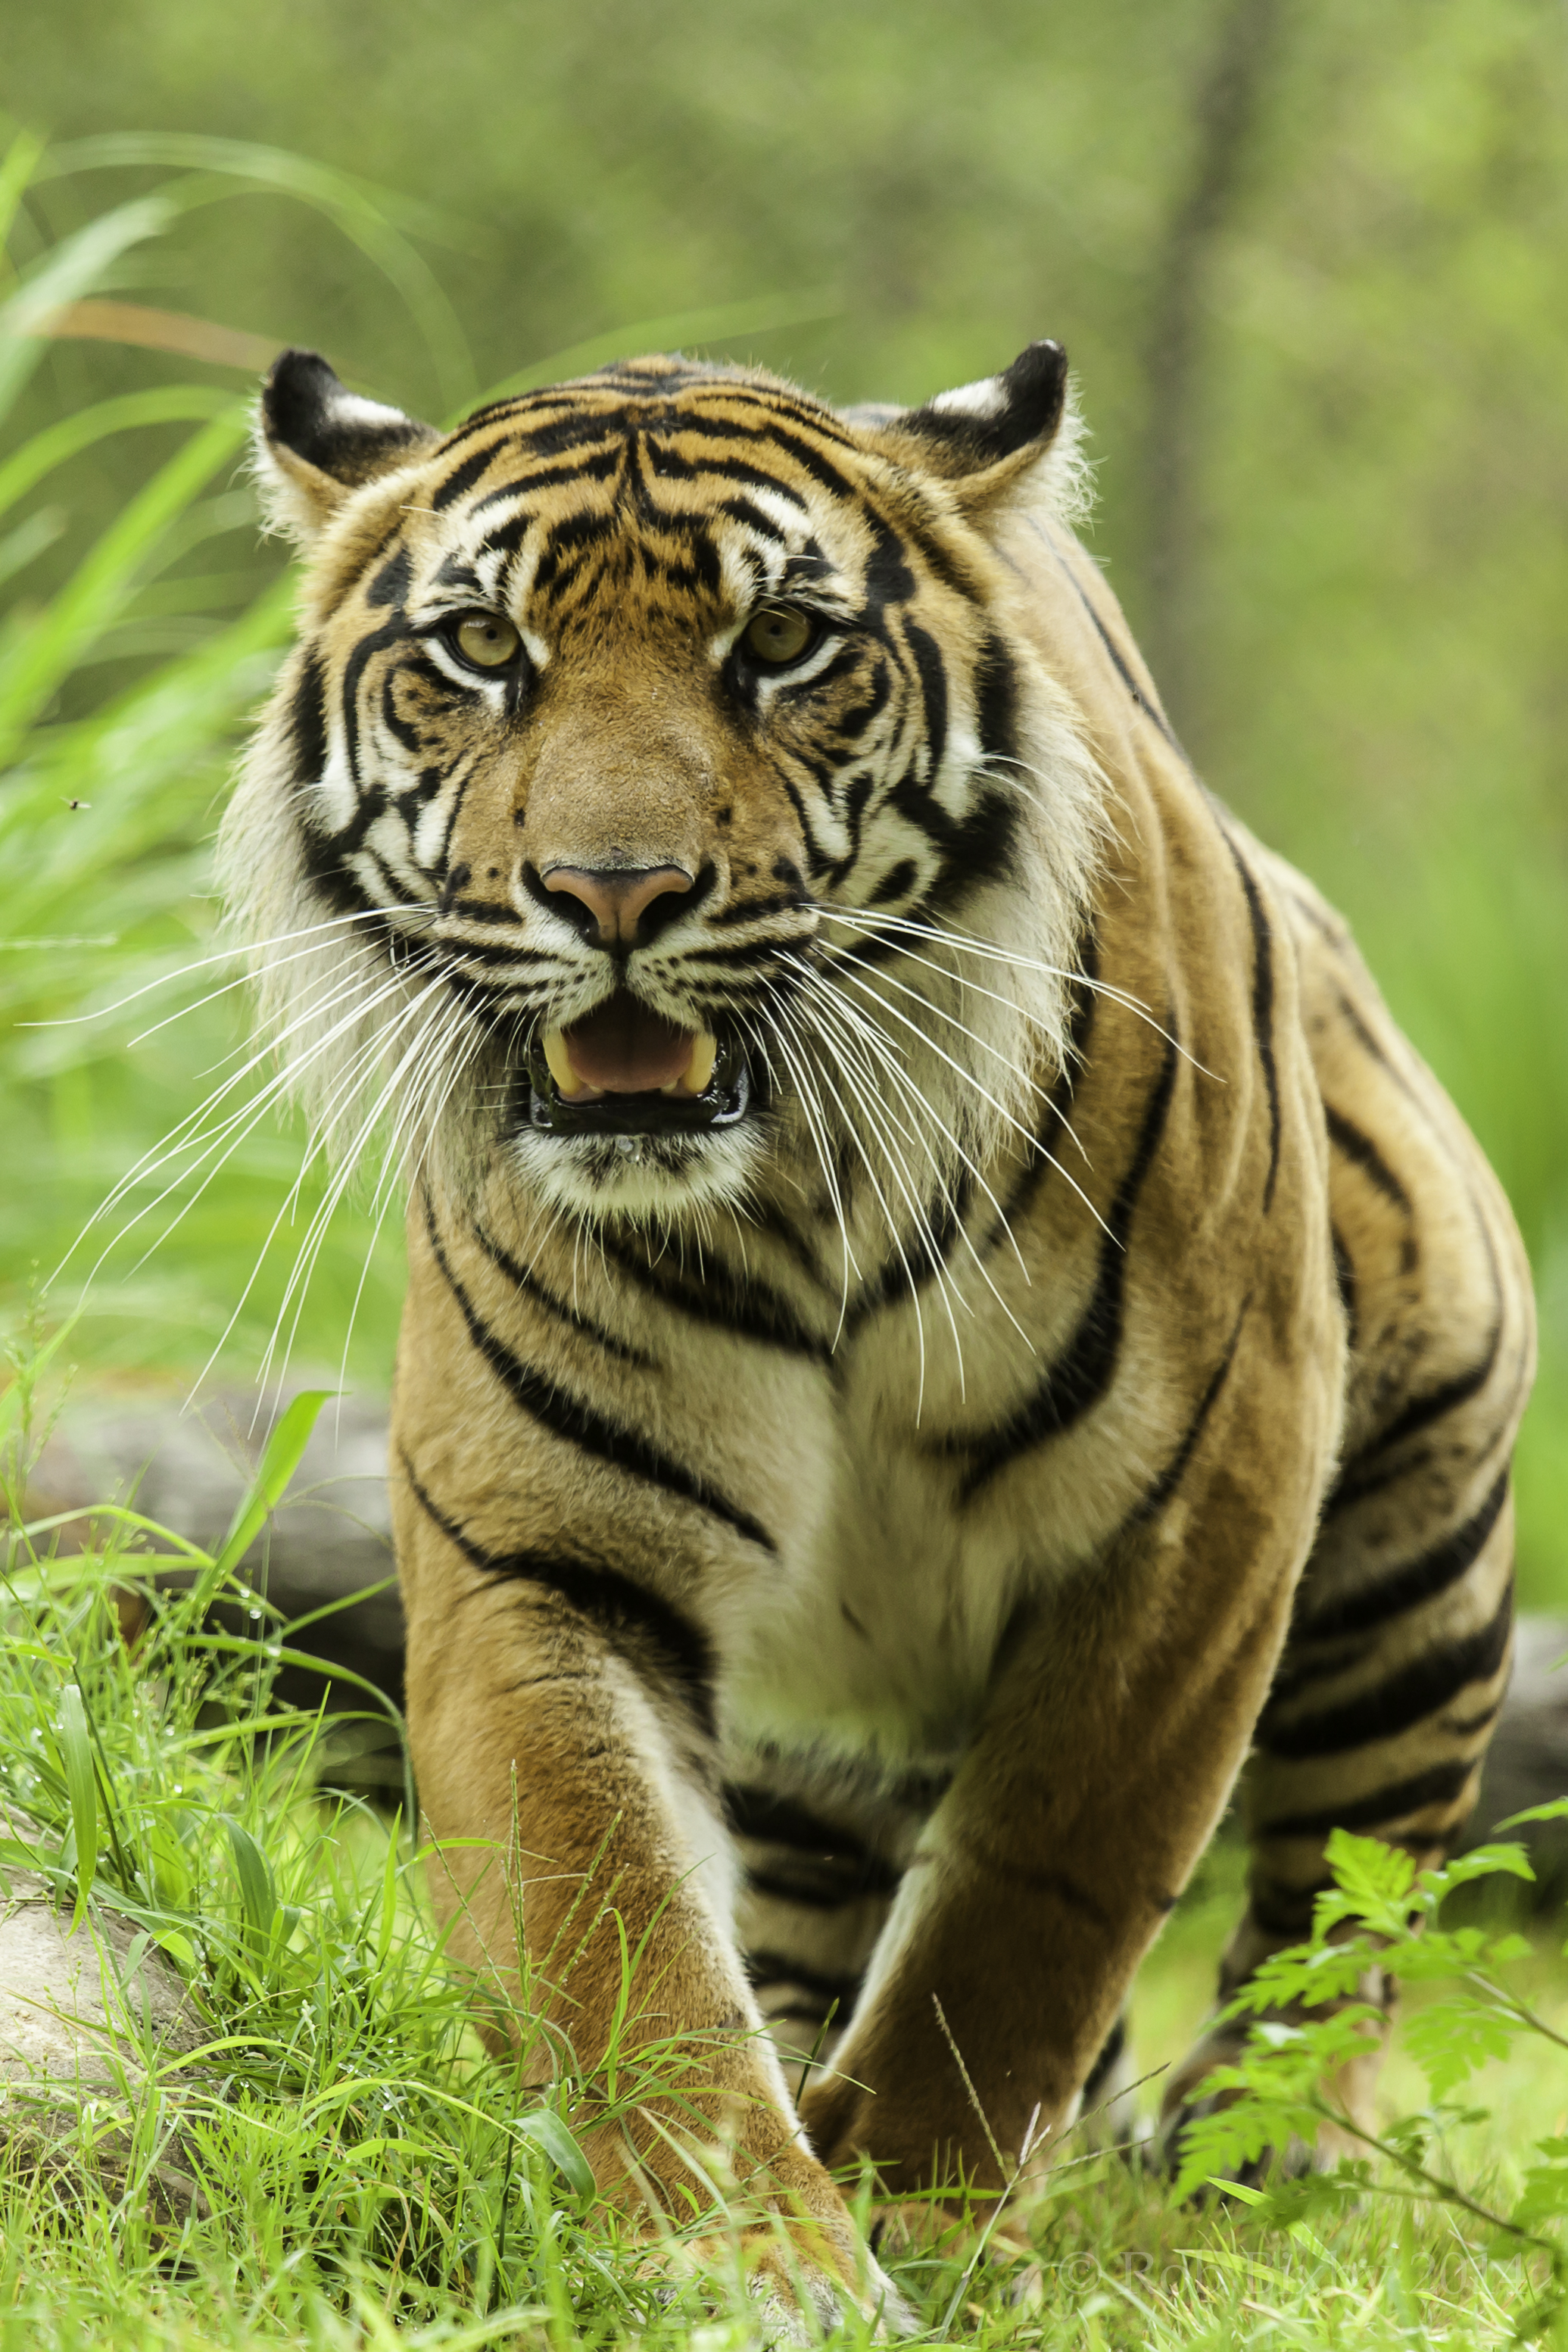 Popular Tiger Image for Phone